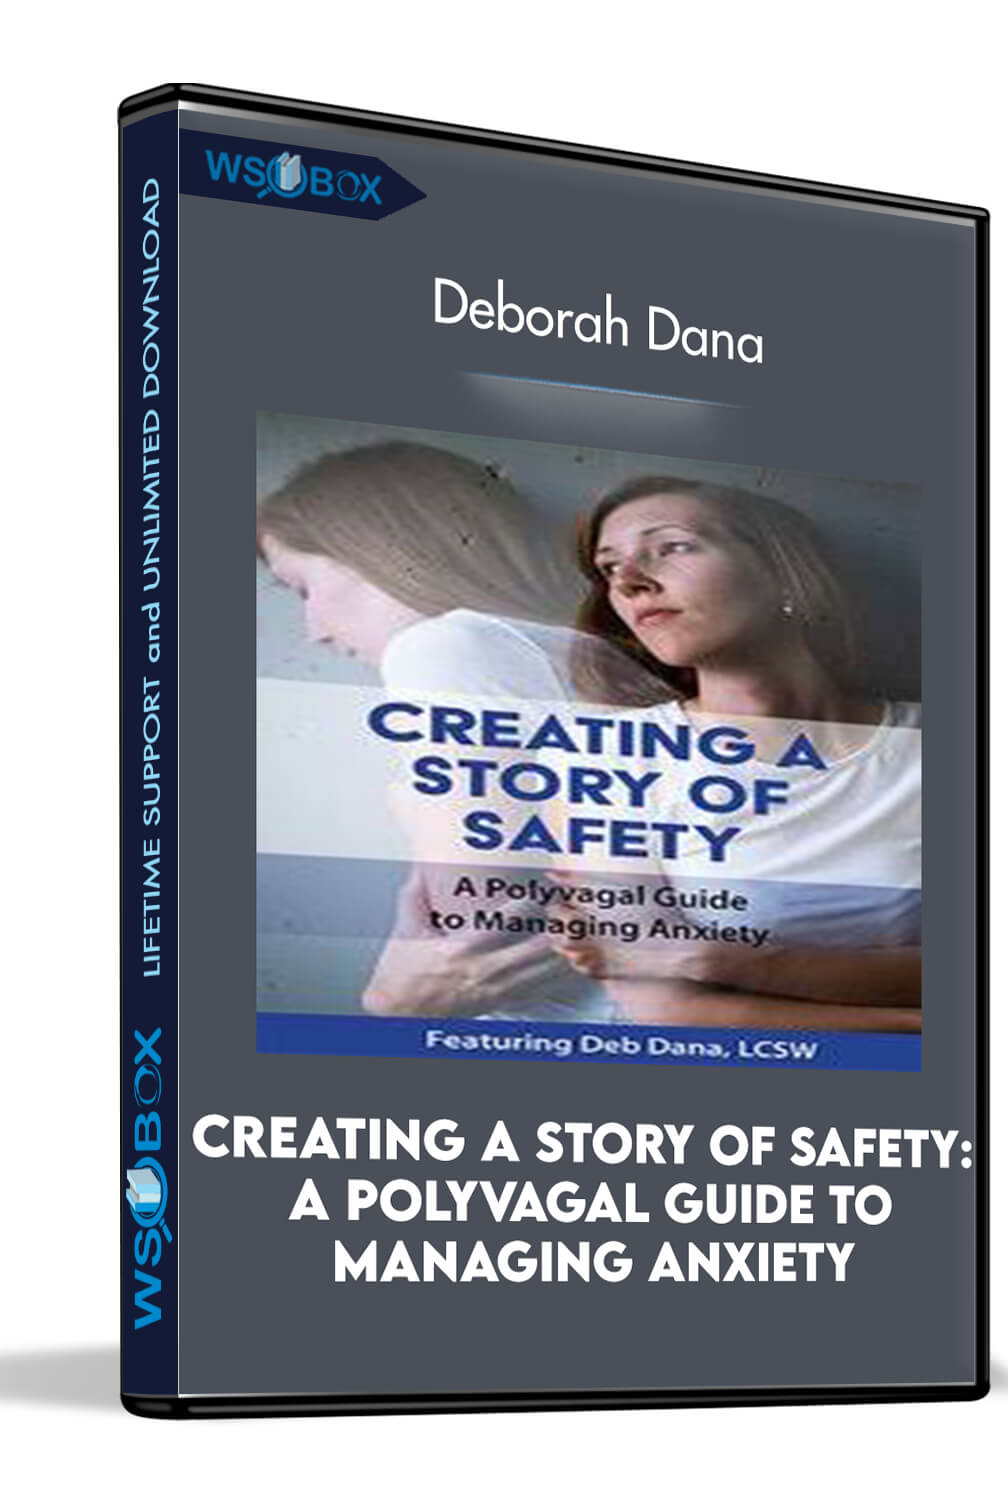 Creating a Story of Safety: A Polyvagal Guide to Managing Anxiety - Deborah Dana